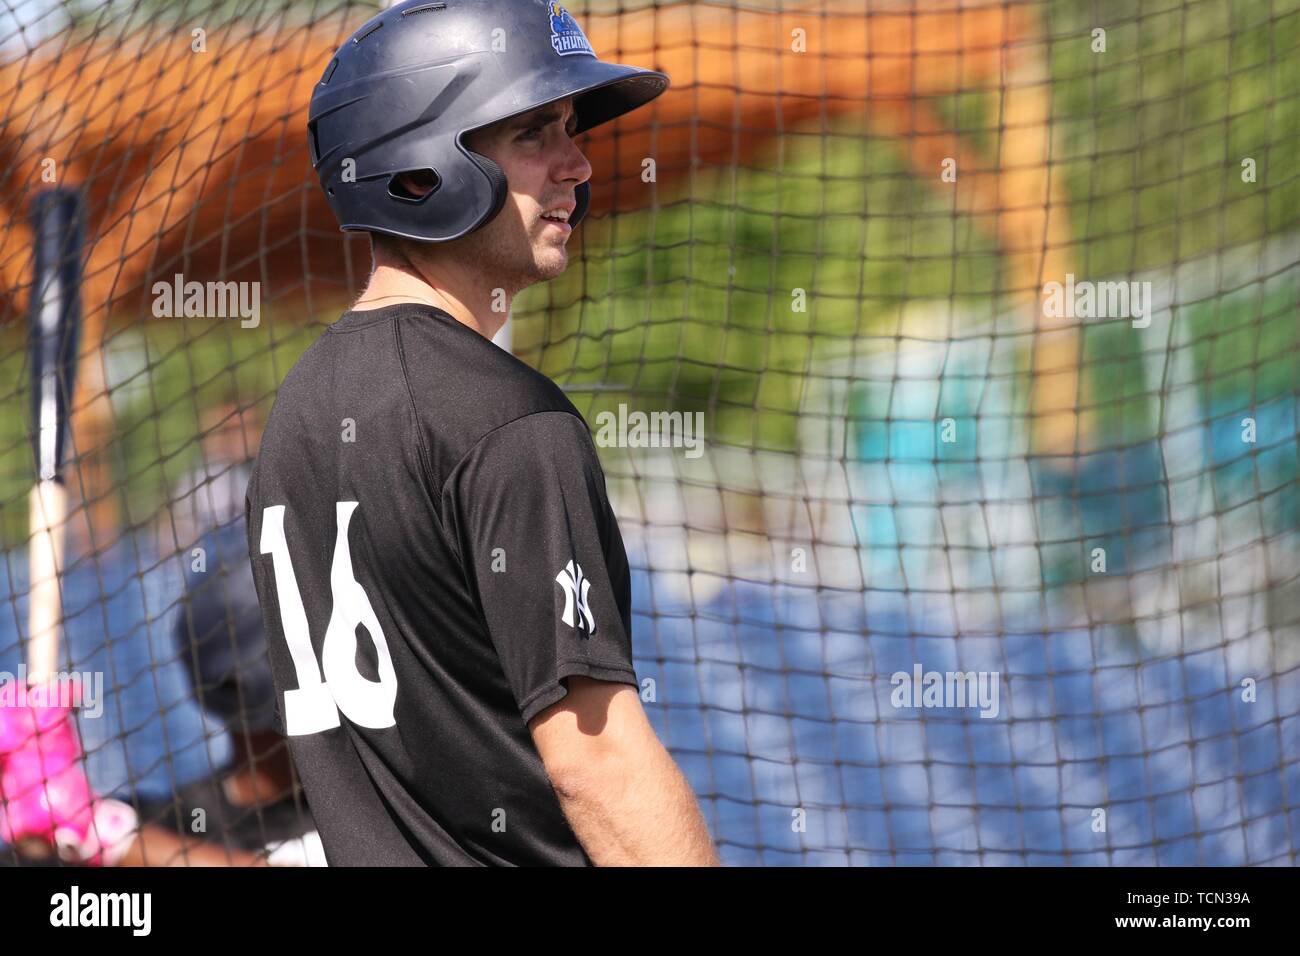 Trenton, New Jersey, USA. 8th June, 2019. BEN RUTA of the Trenton Thunder  at batting practice before a game vs. the Erie SeaWolves at ARM & HAMMER  Park. The Thunder are called